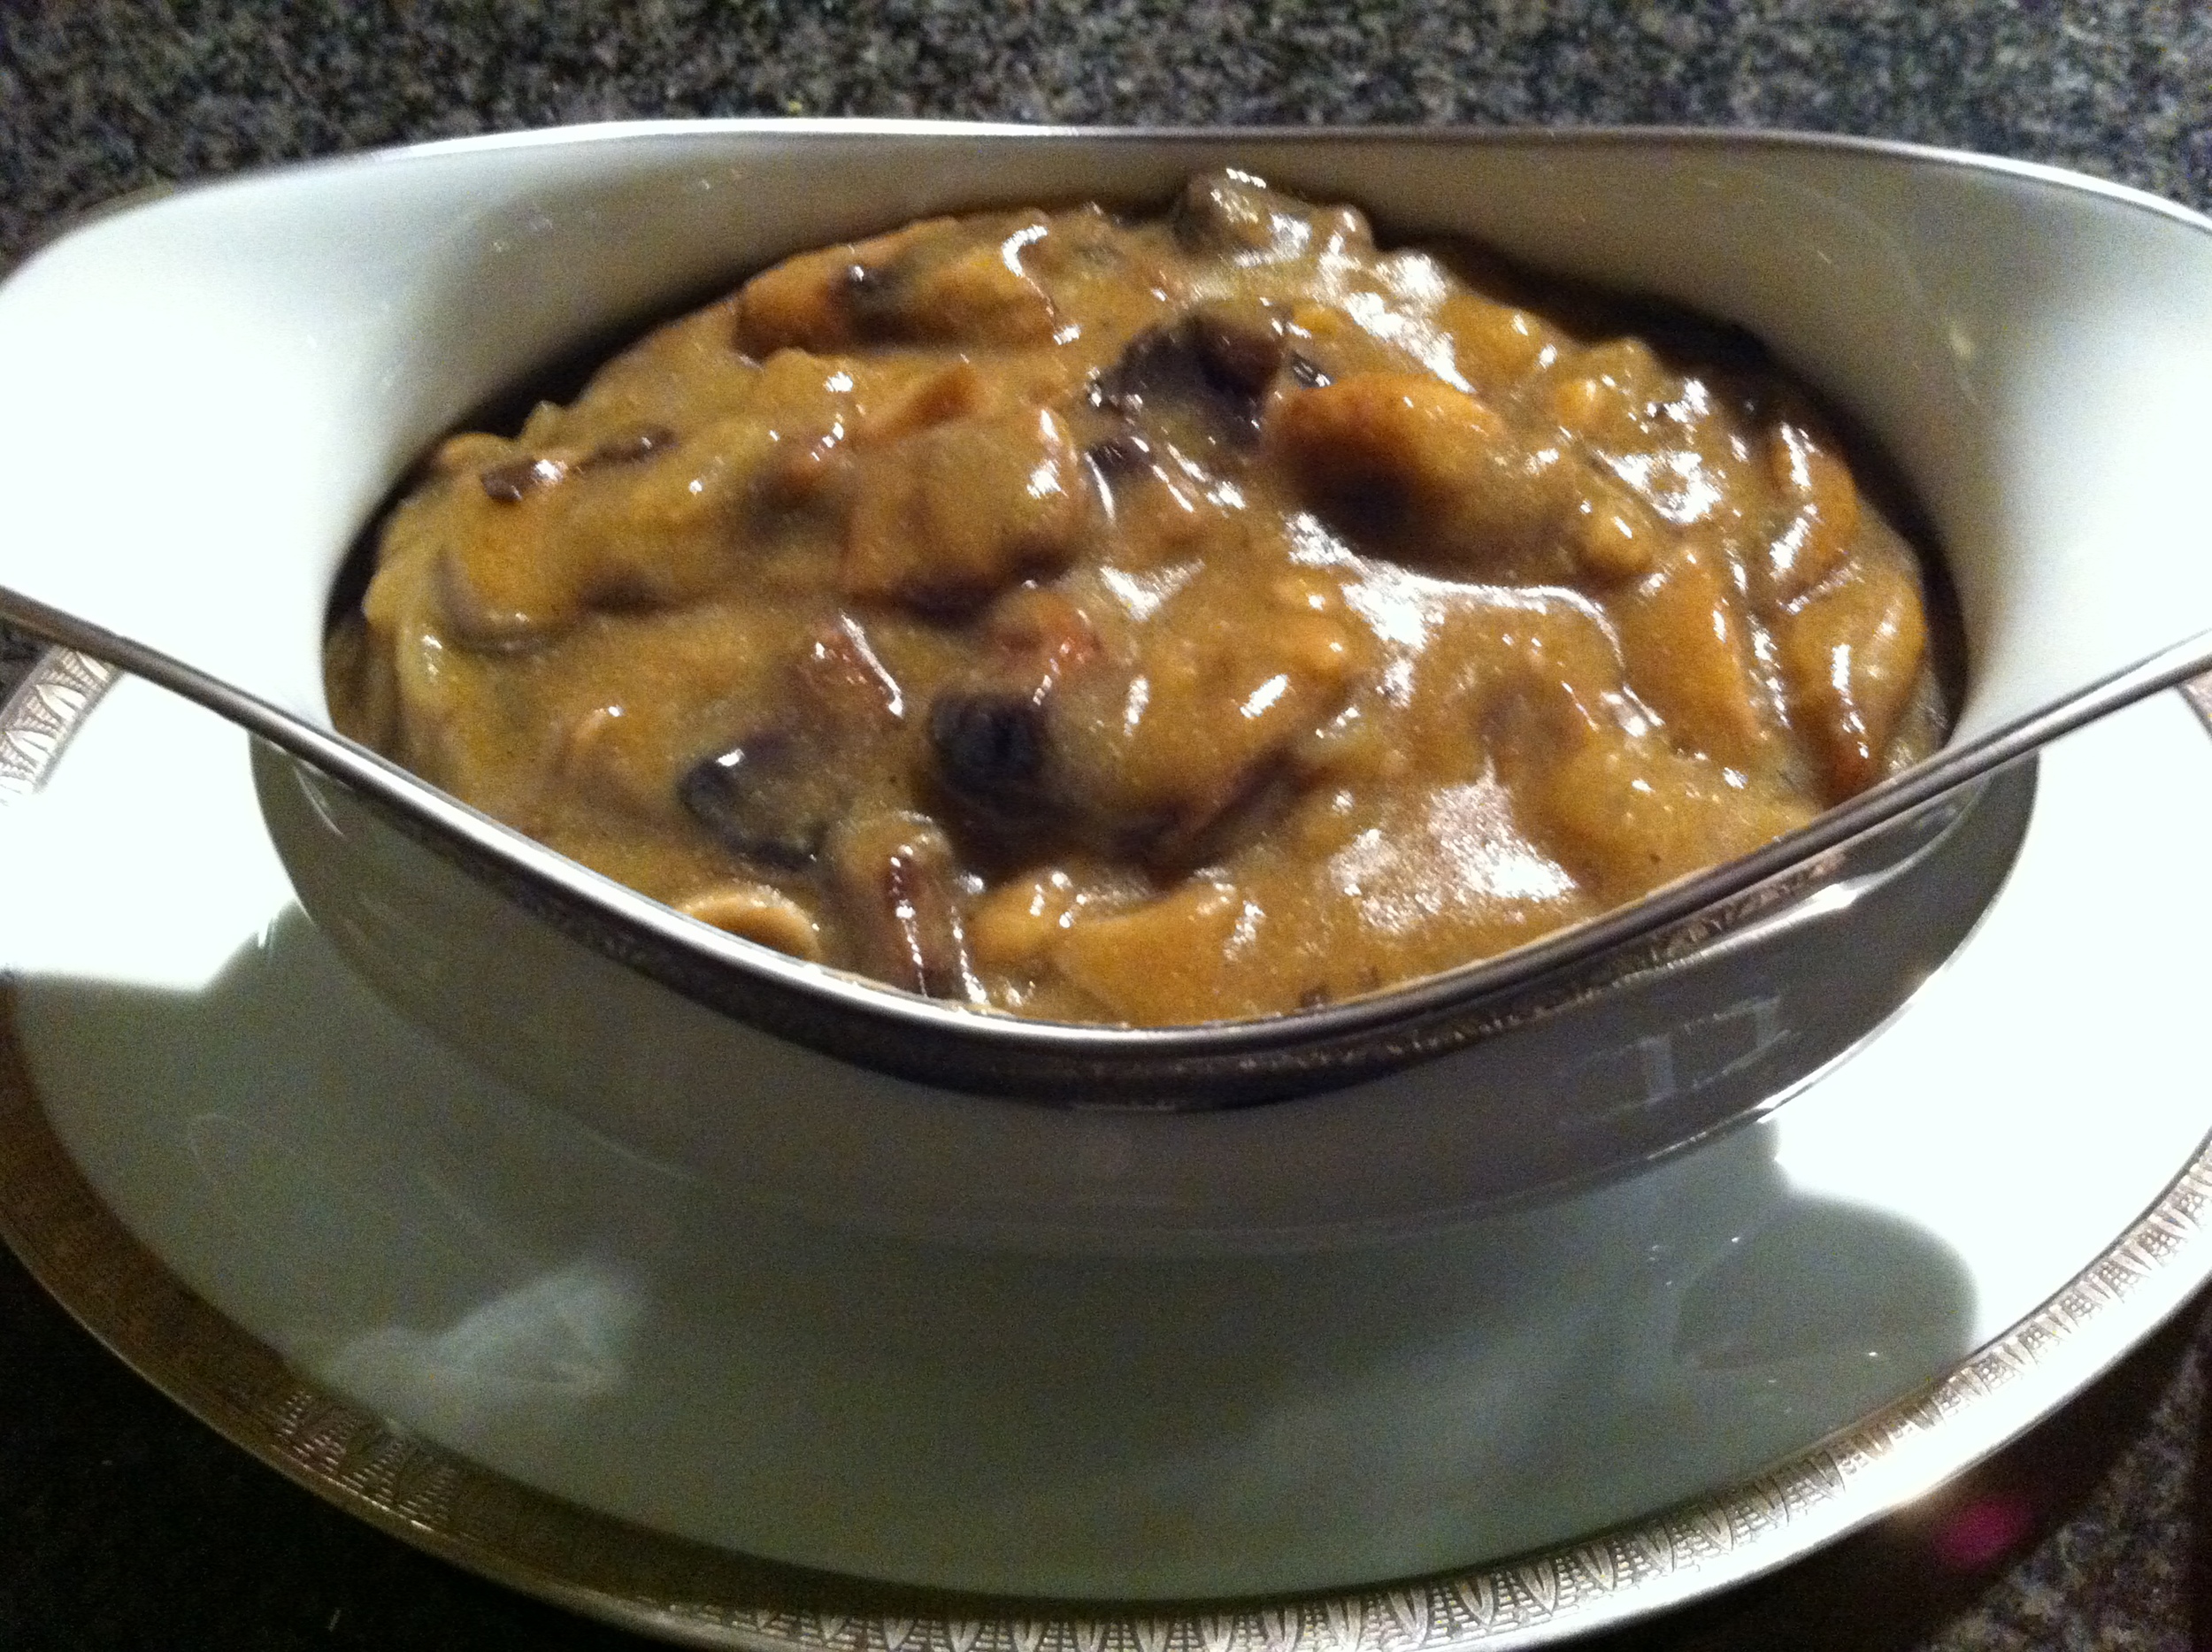 This mushroom gravy is totally vegan and perfect for Thanksgiving.